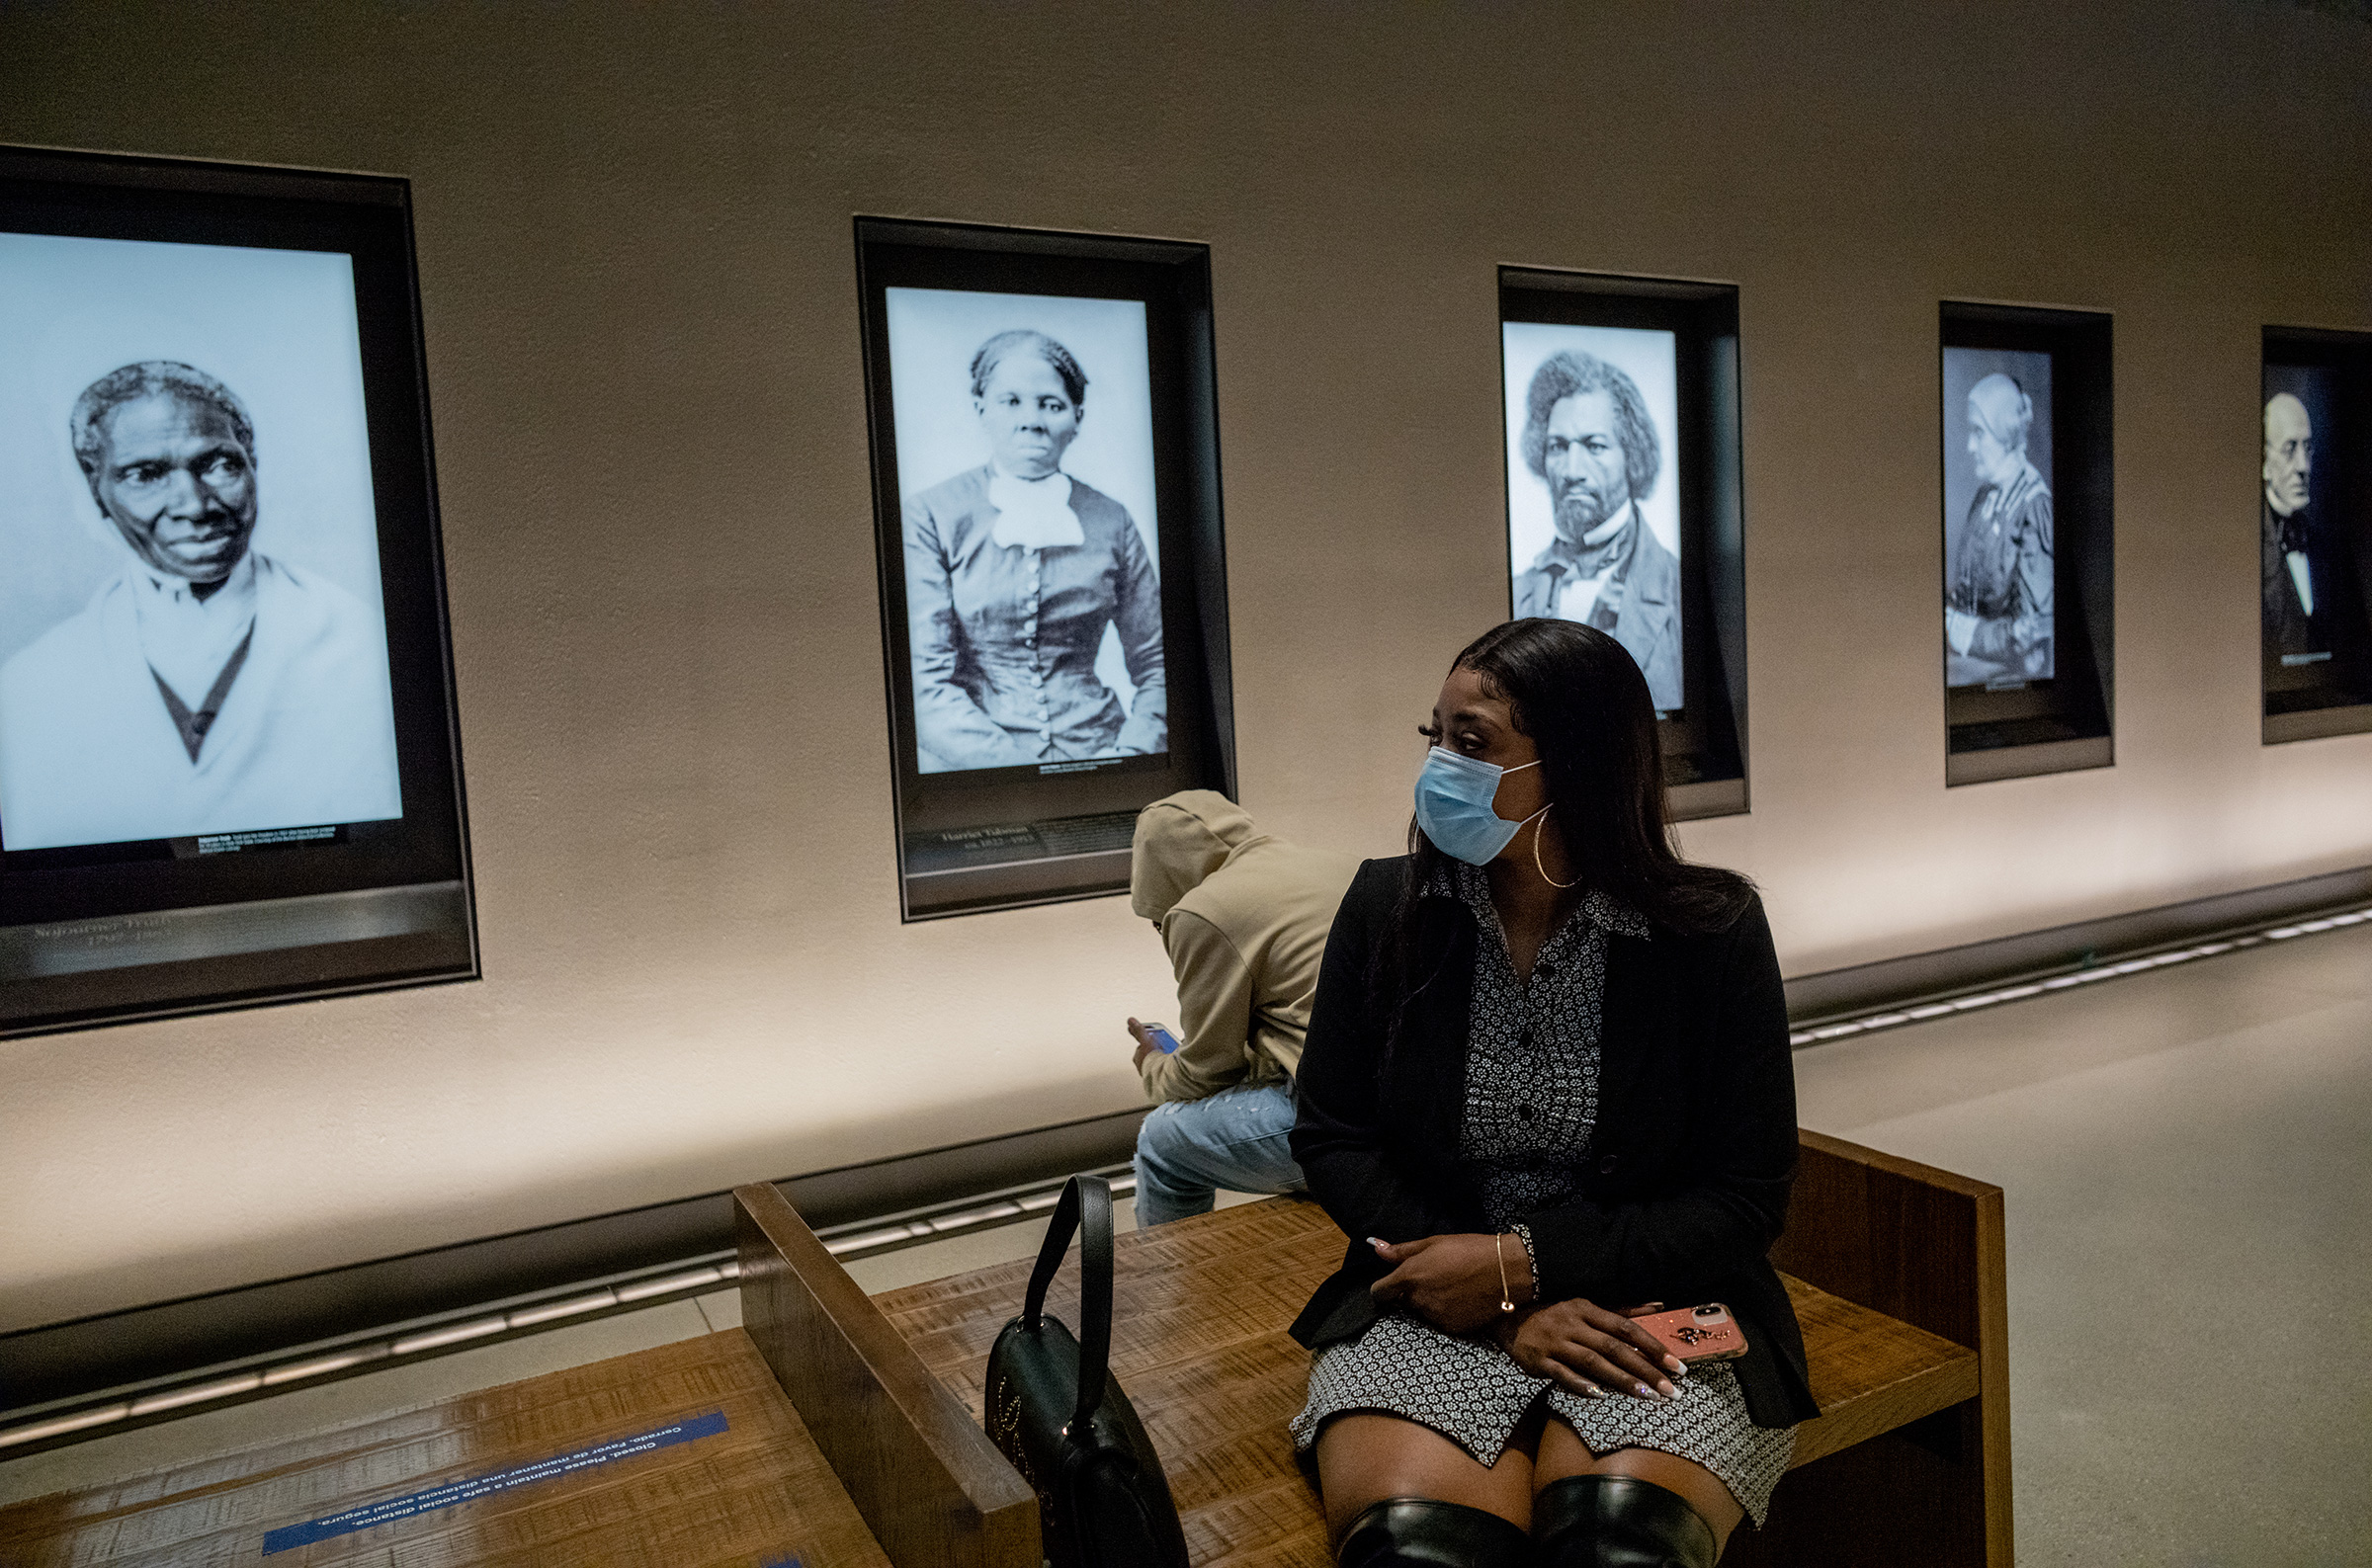 Bridgett Floyd sits near a wall showing famous portraits at the National Museum of African American History and Culture on Feb. 27 in Washington, D.C. She is flanked by digitized photographs of Harriet Tubman and Frederick Douglass. (Ruddy Roye for TIME)